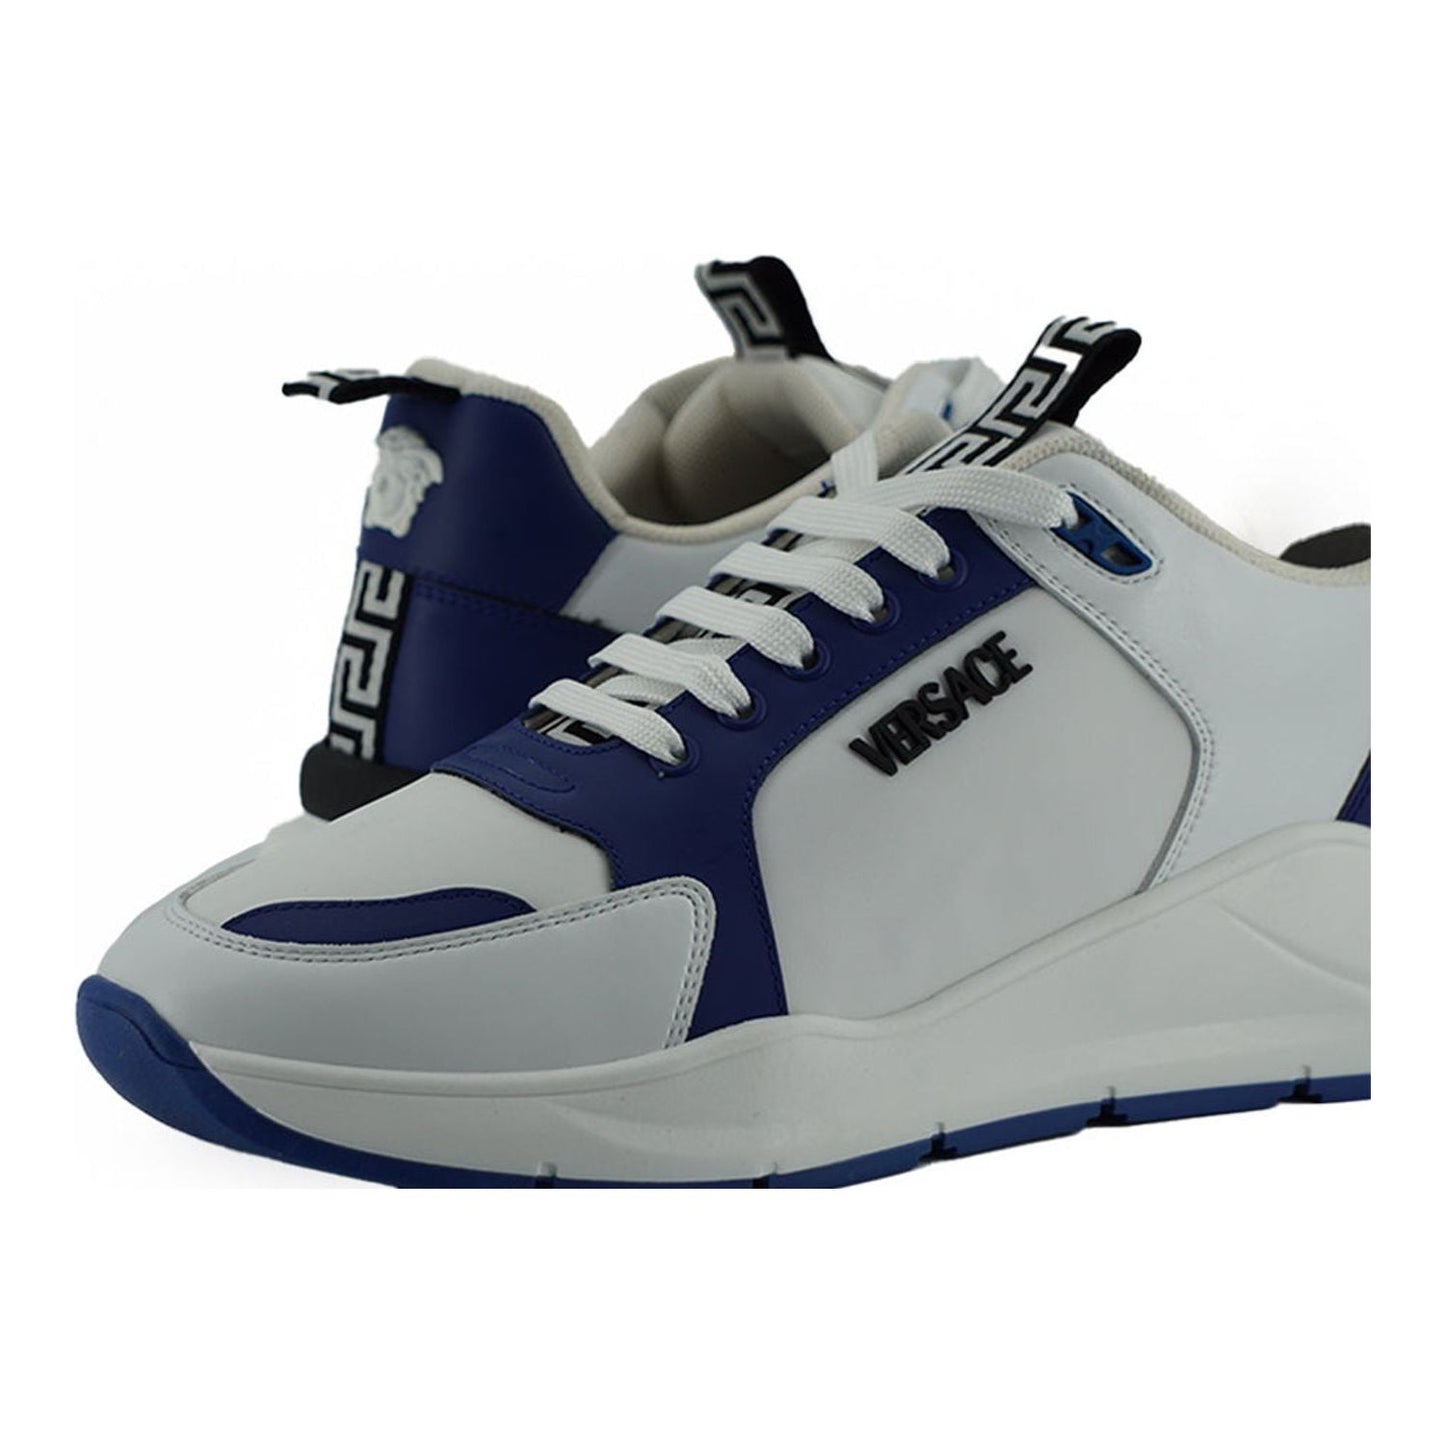 Versace Elegant Blue and White Leather Sneakers blue-and-white-calf-leather-sneakers